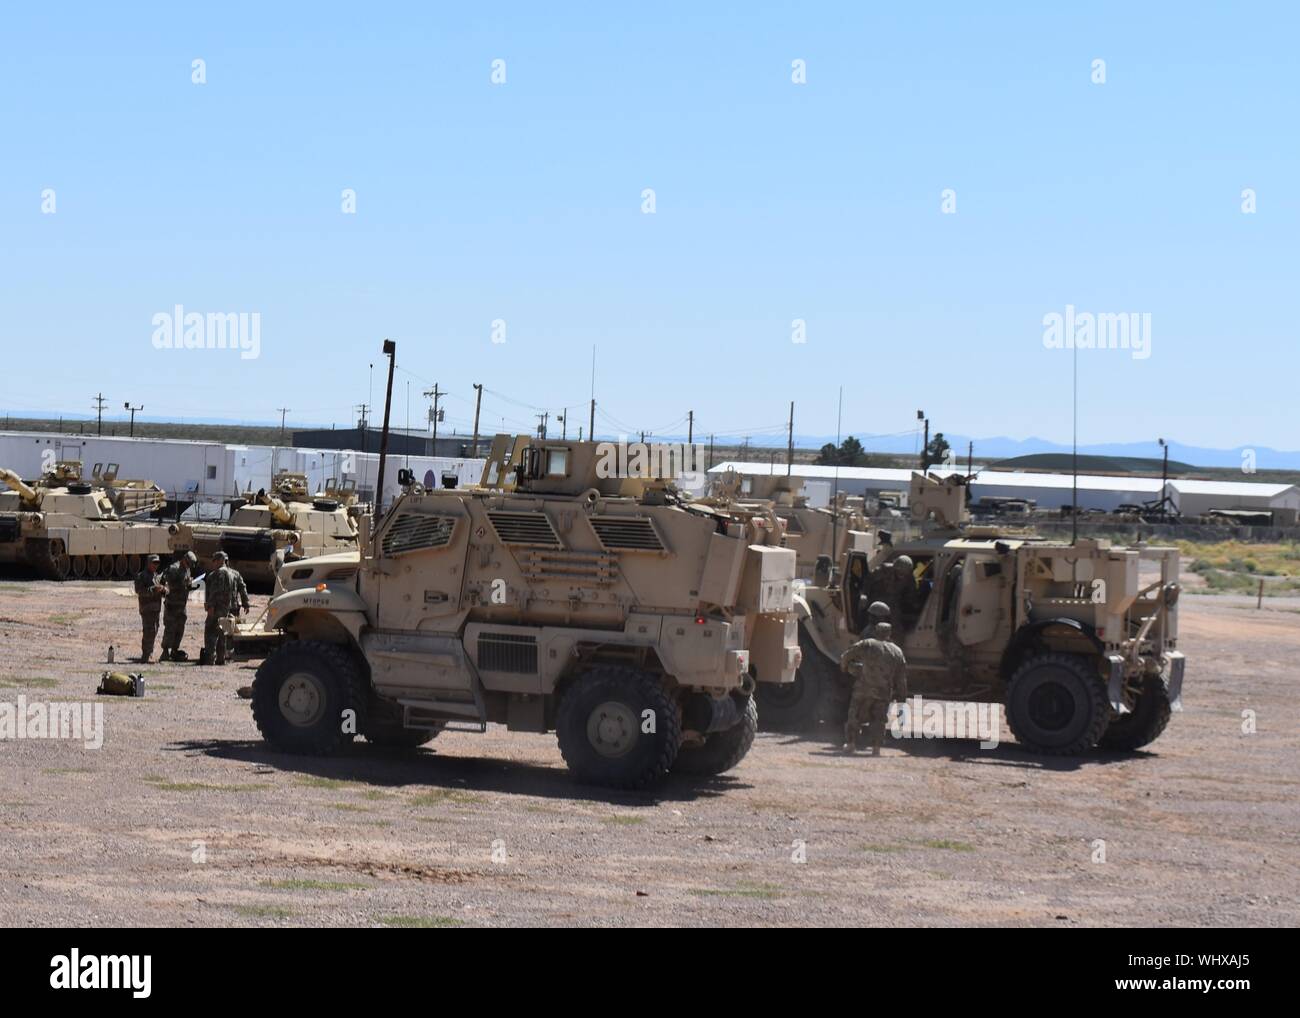 U.S. Soldiers in Bravo Company, 1-252 Armor Regiment, 30th Armored Brigade Combat Team, North Carolina National Guard, drive the MaxxPro Mine Resistance Ambush Protected (MRAP) and Joint Light Tactical Vehicle (JLTV) while conducting mobilization training in the vicinity of Fort Bliss, Texas, August 31, 2019.  The 30th ABCT is preparing to mobilize to support Operation Spartan Shield and is comprised of Soldiers from the North Carolina, South Carolina, West Virgina and Ohio National Guard. (U.S. Army National Guard photo by Lt. Col. Cindi King) Stock Photo